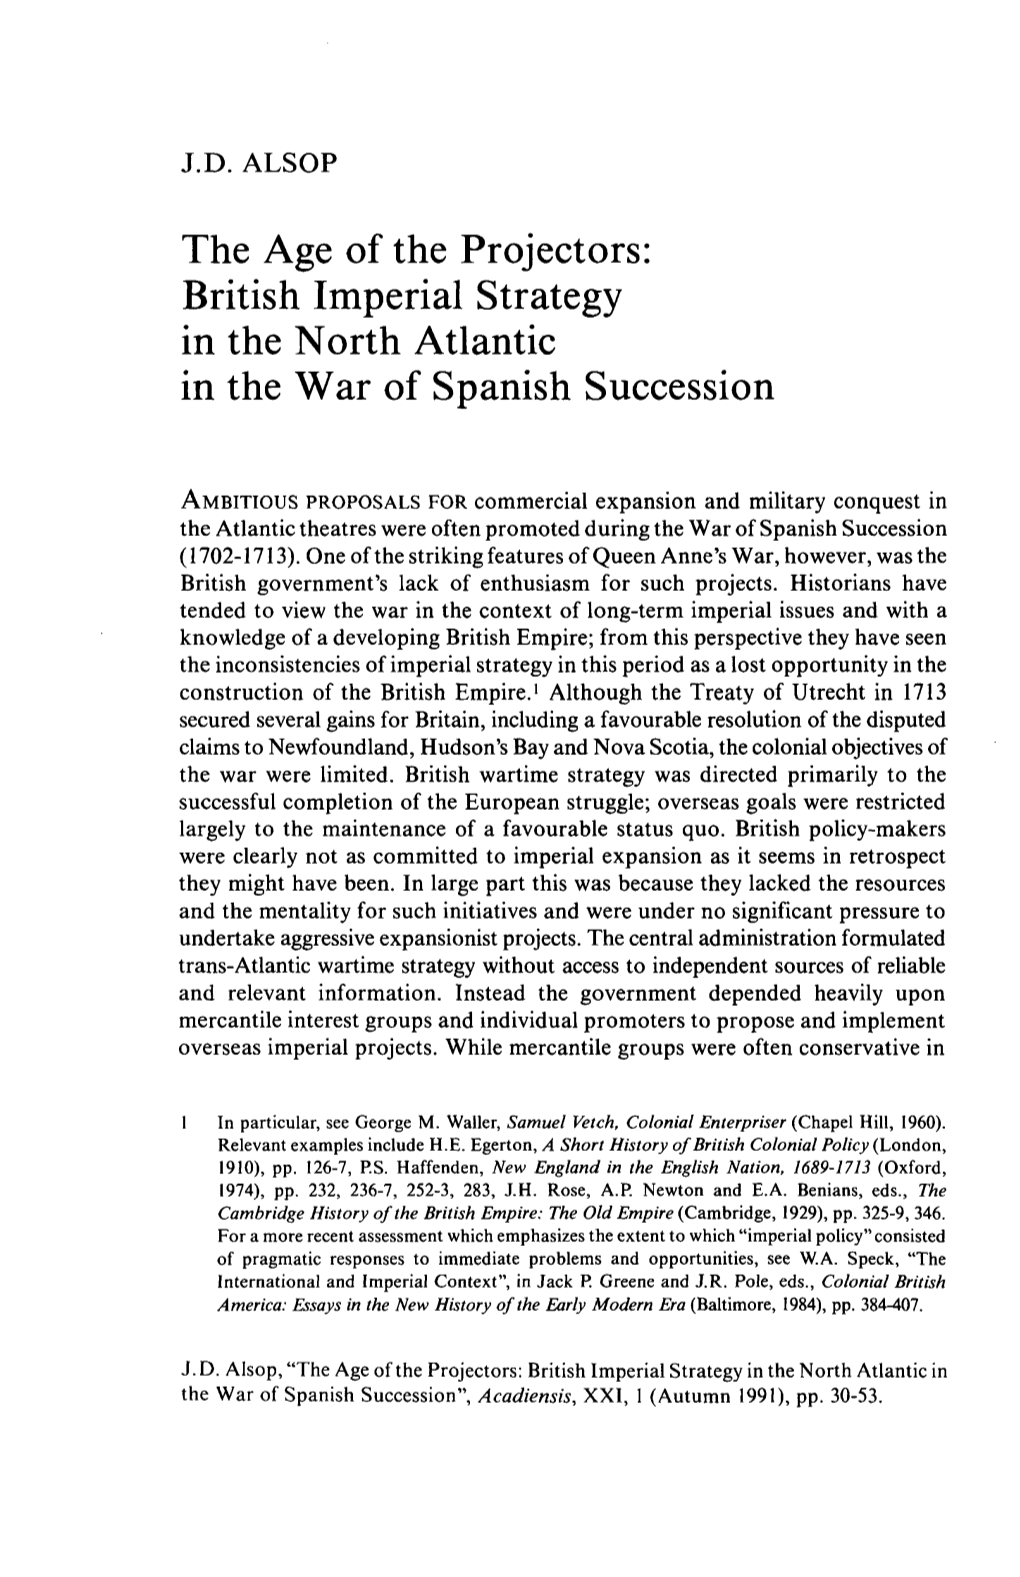 British Imperial Strategy in the North Atlantic in the War of Spanish Succession